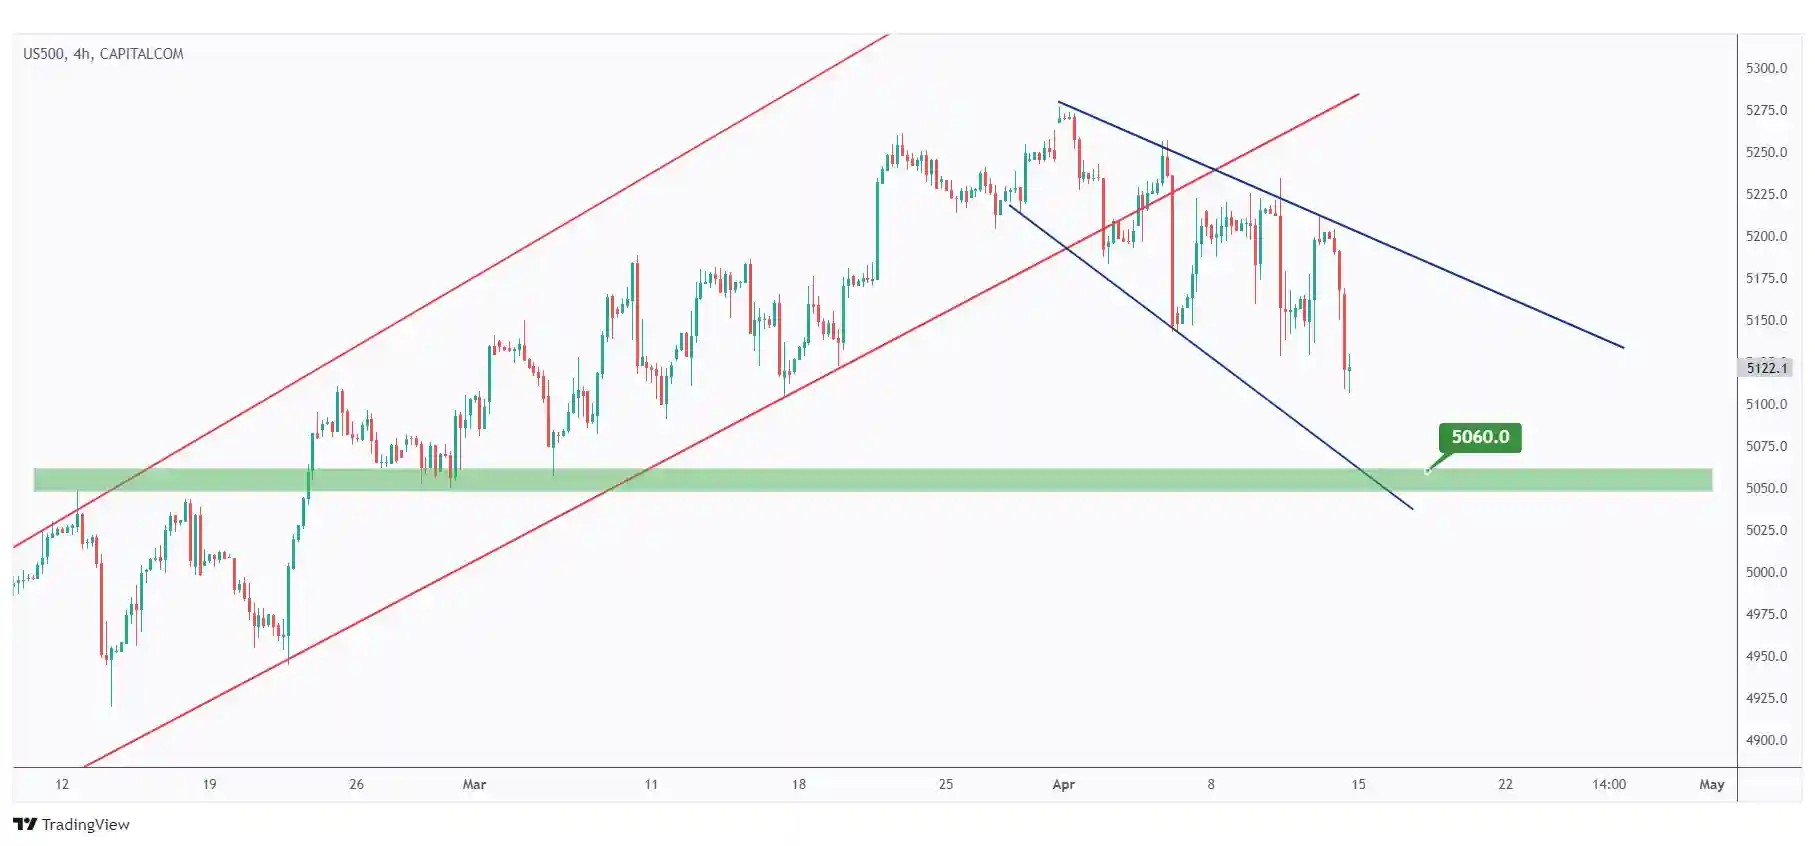 US500 4H chart overall bearish trading within the falling wedge pattern and currently approaching the lower bound and $5060 support.